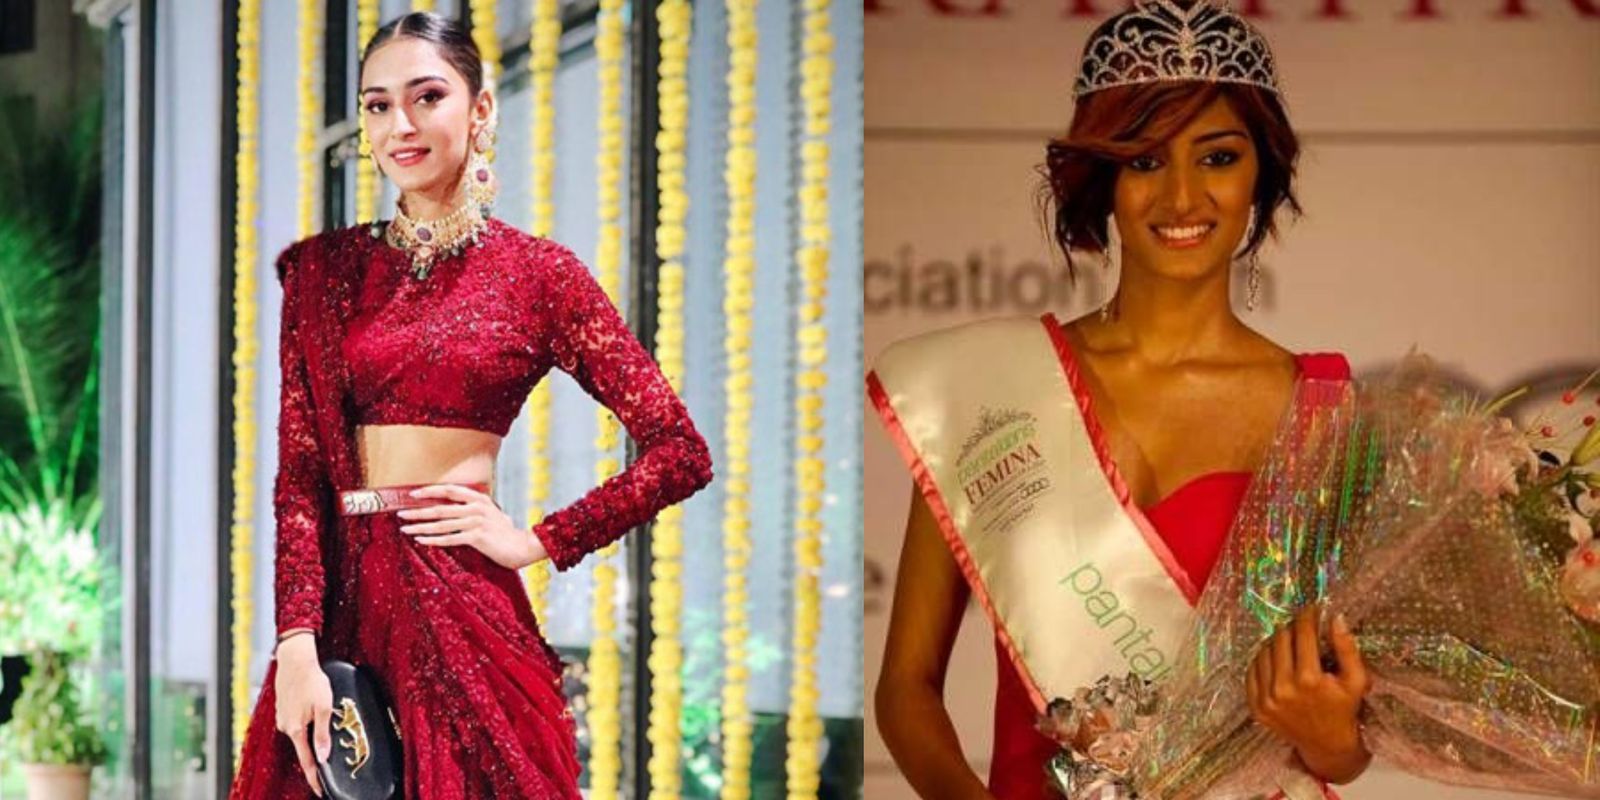 Trivia: Did You Know Erica Fernandez Was Miss Maharashtra in 2011 And Had Been Amongst The Top 10 In Miss India That Year?